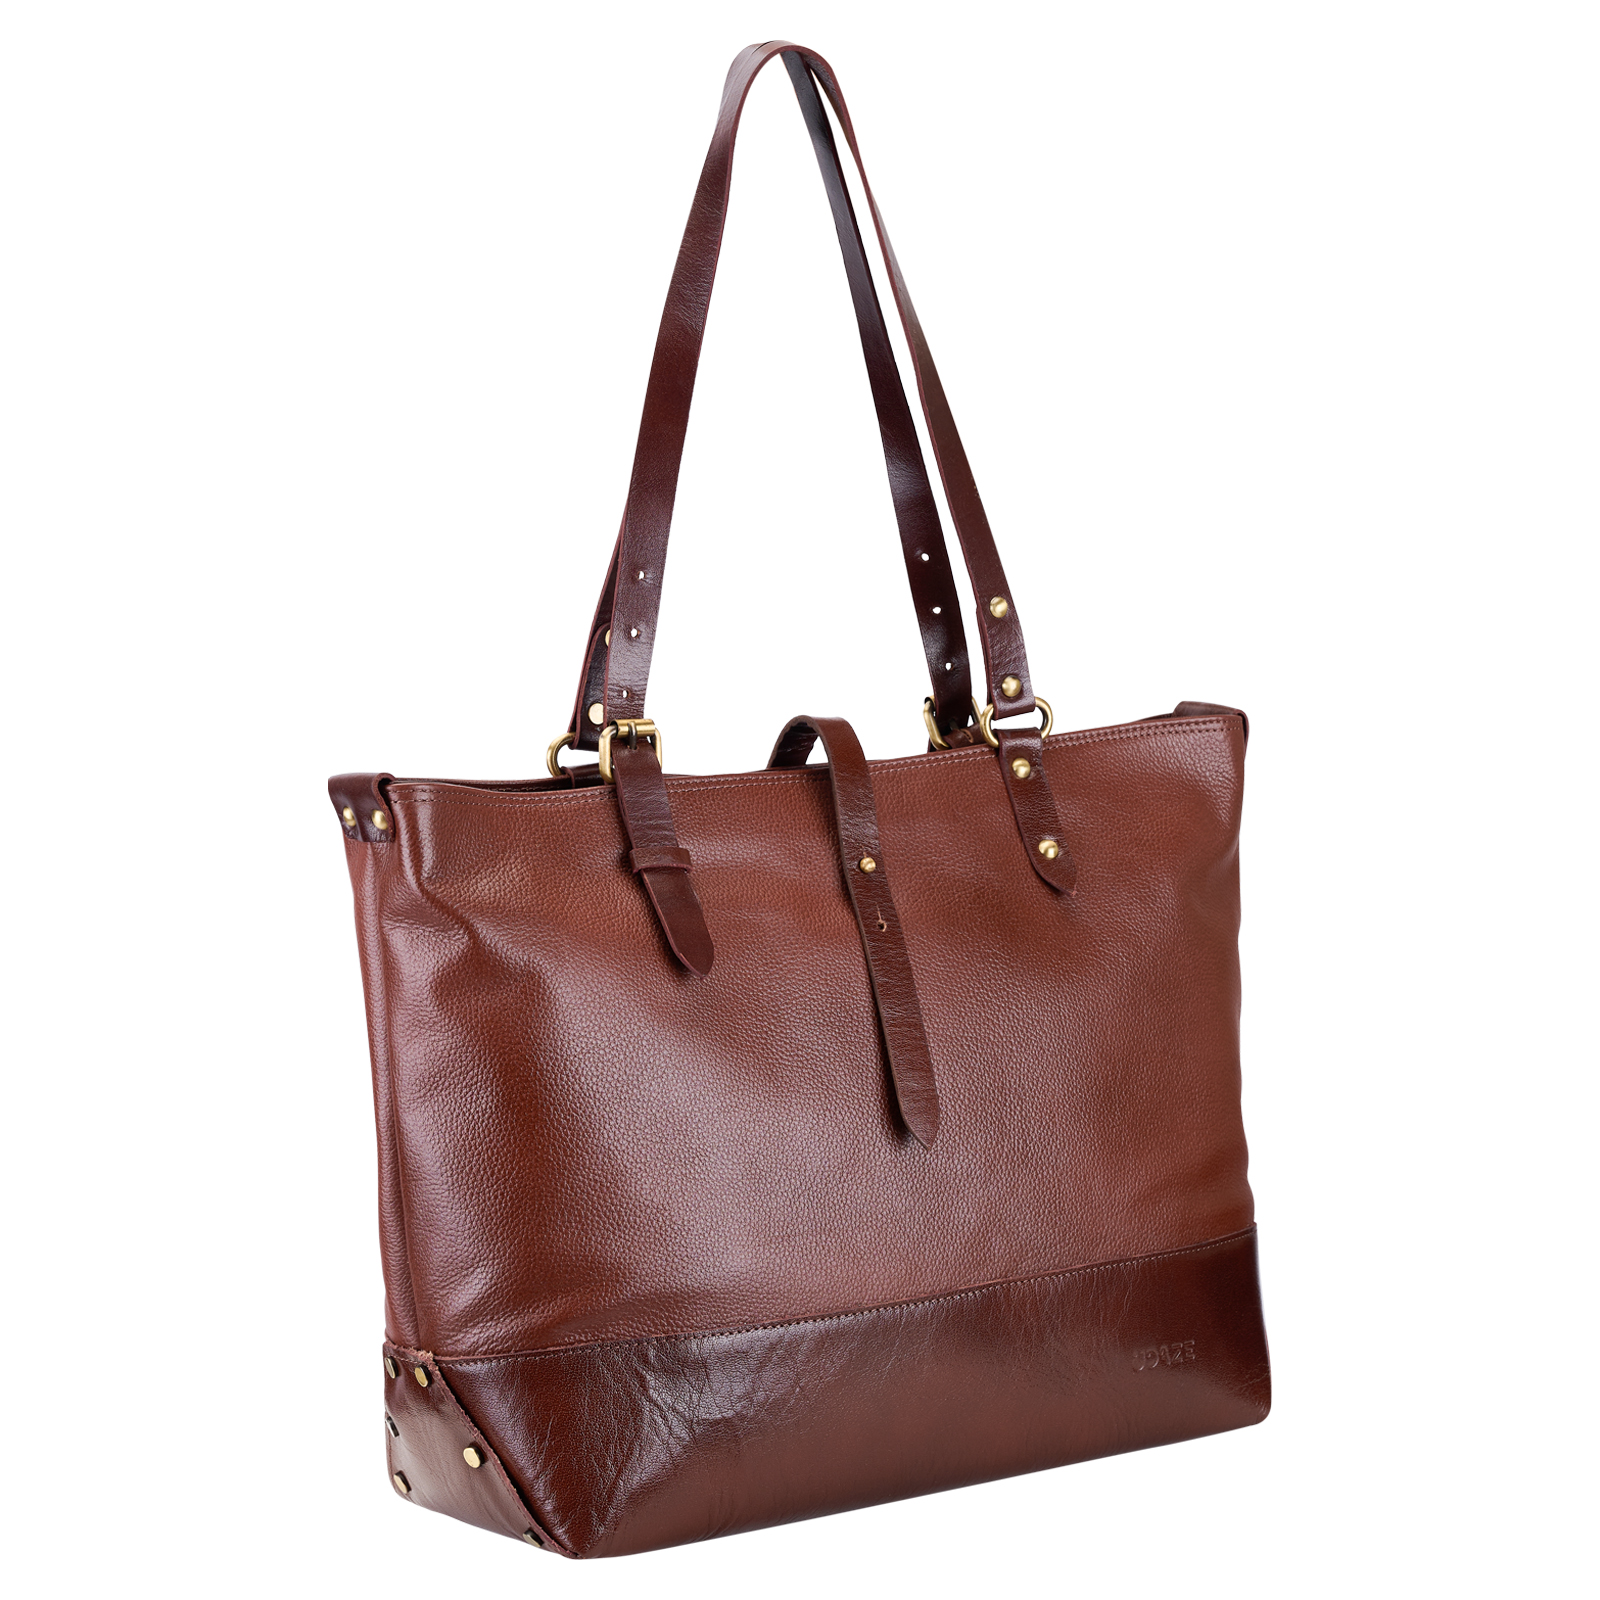 Share 94+ big office bags for ladies latest - in.duhocakina